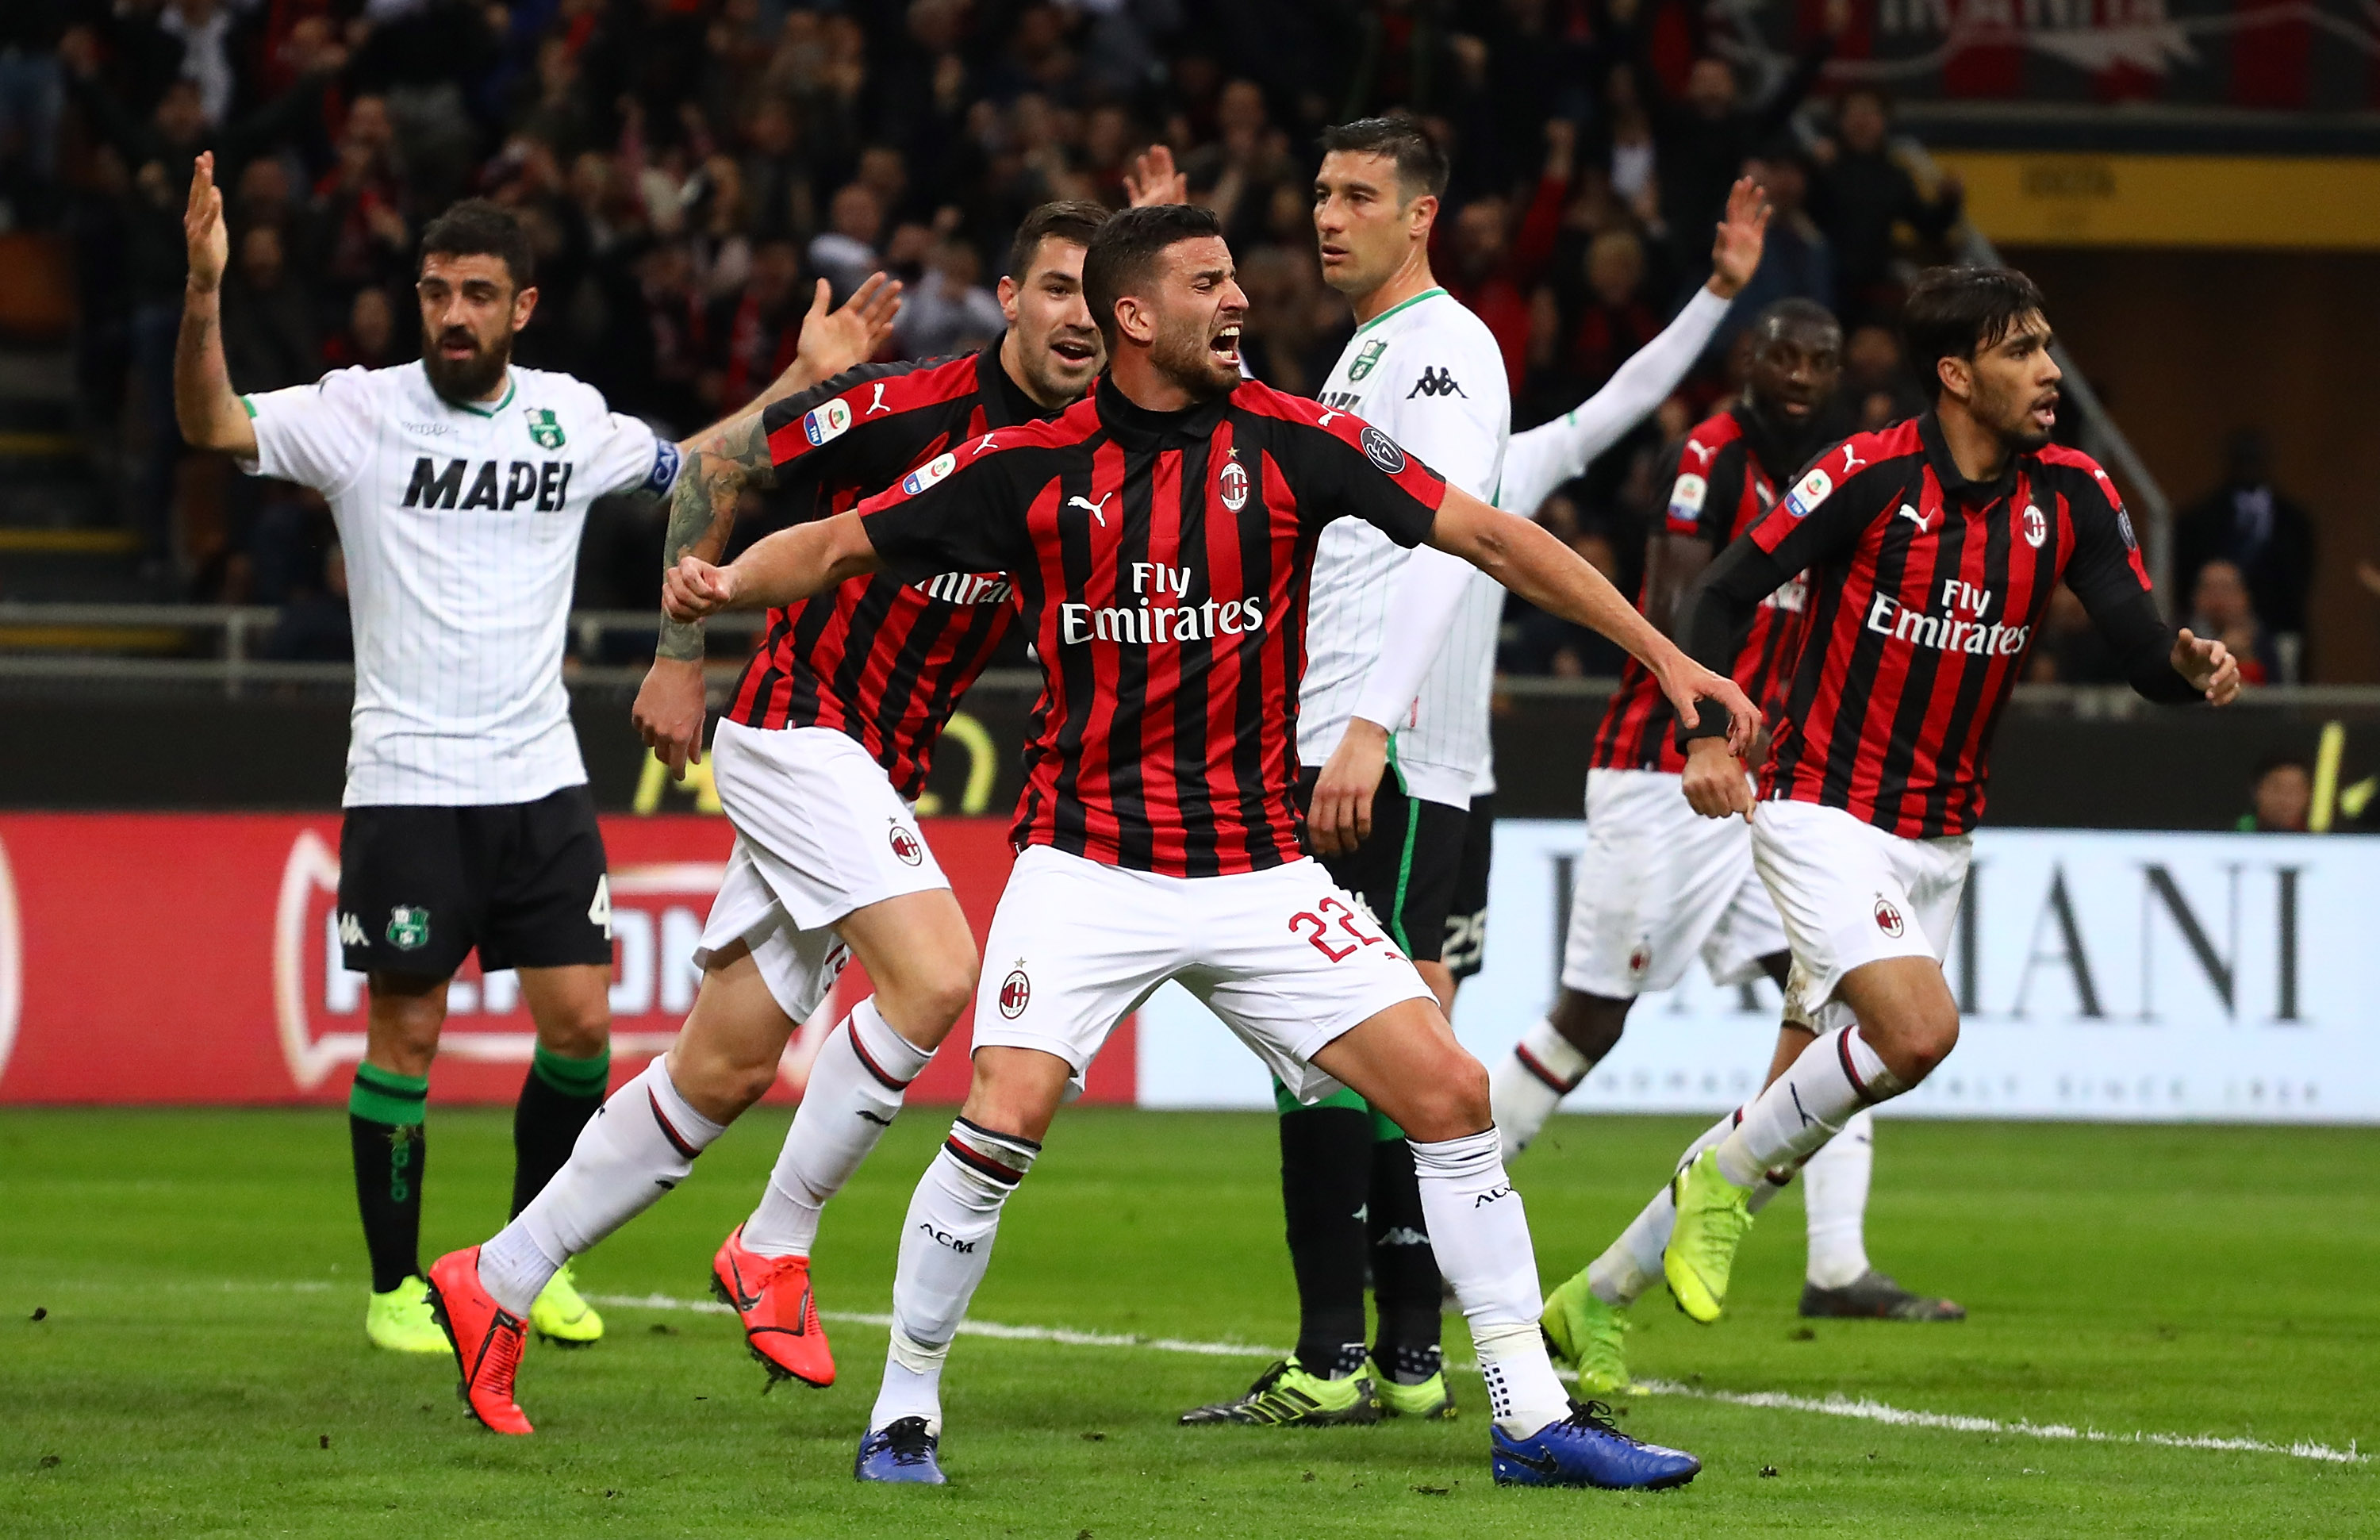 MILAN, ITALY - MARCH 02: Mateo Musacchio #22 of AC Milan celebrates after scoring the opening goal during the Serie A match between AC Milan and US Sassuolo at Stadio Giuseppe Meazza on March 2, 2019 in Milan, Italy. (Photo by Marco Luzzani/Getty Images)